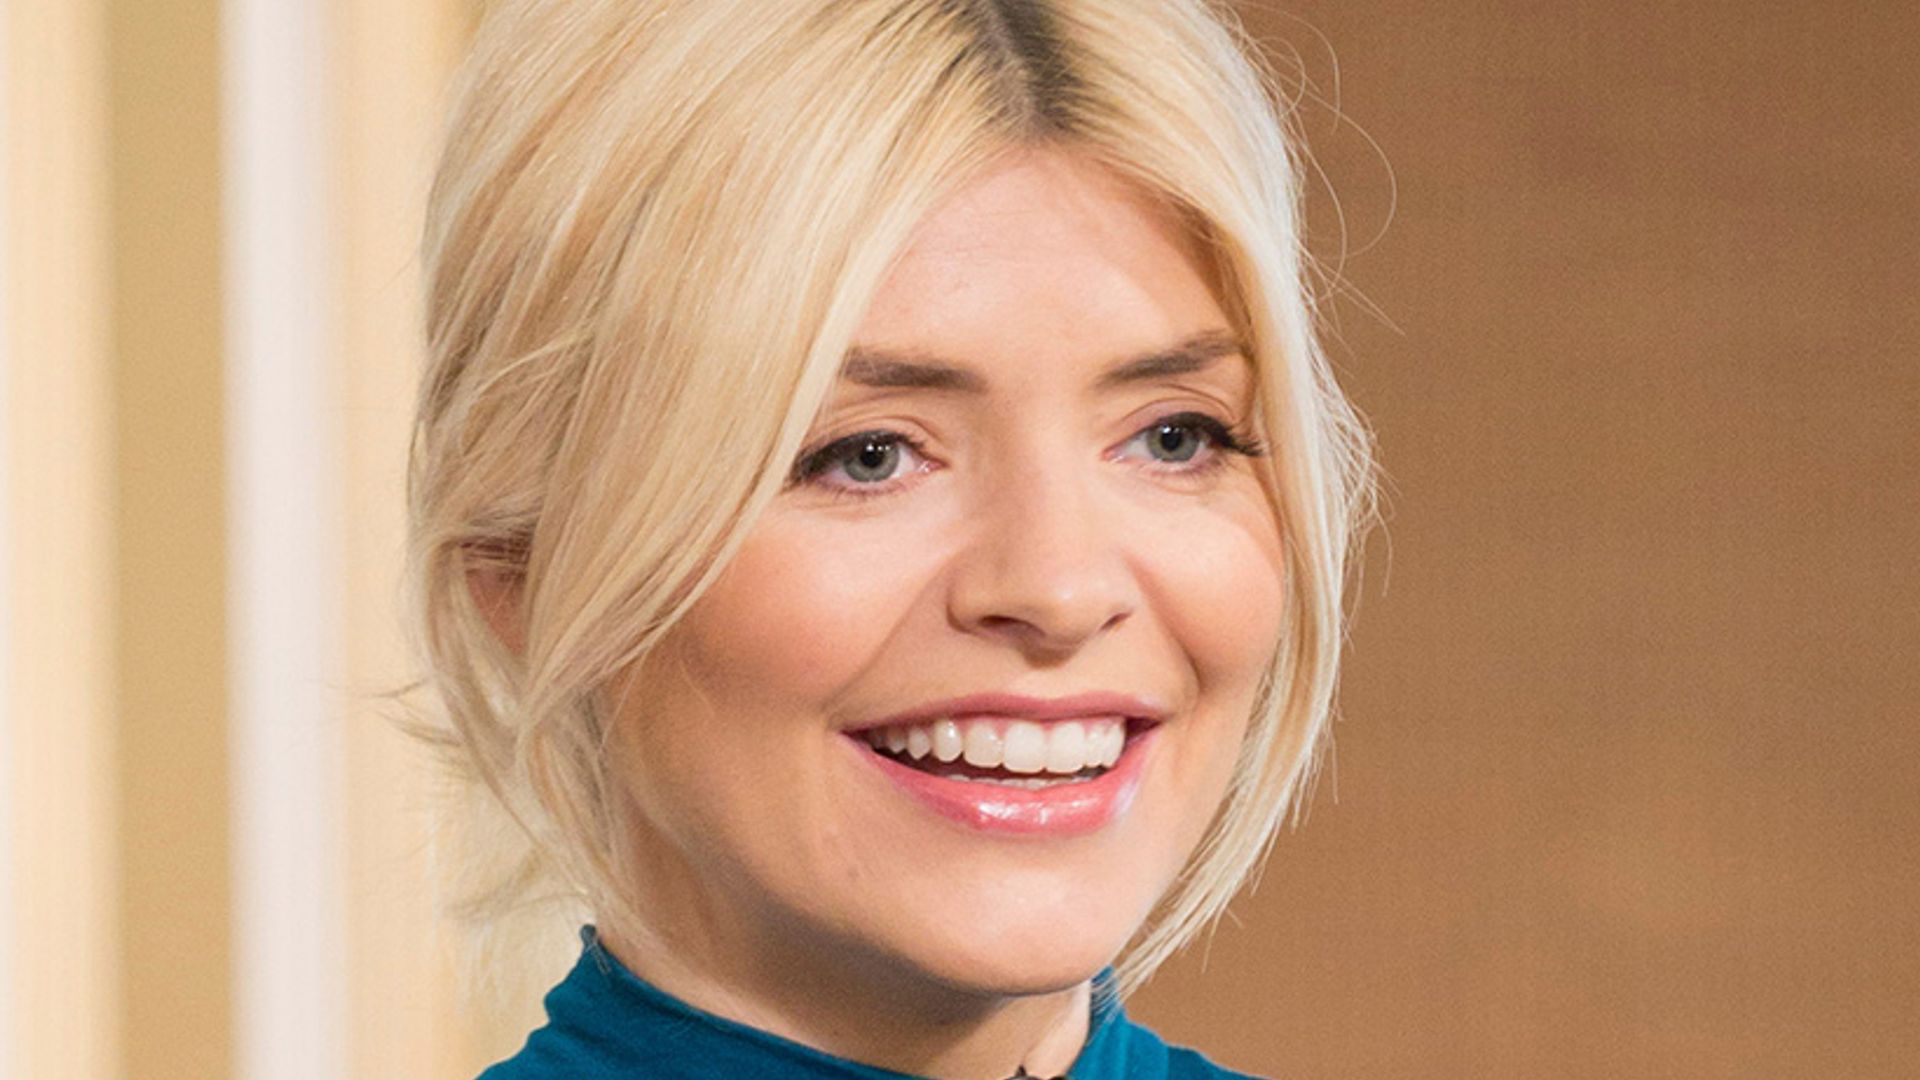 Holly Willoughby Wears Navy And White Striped Top Denim Mini Skirt And Red Boots On This